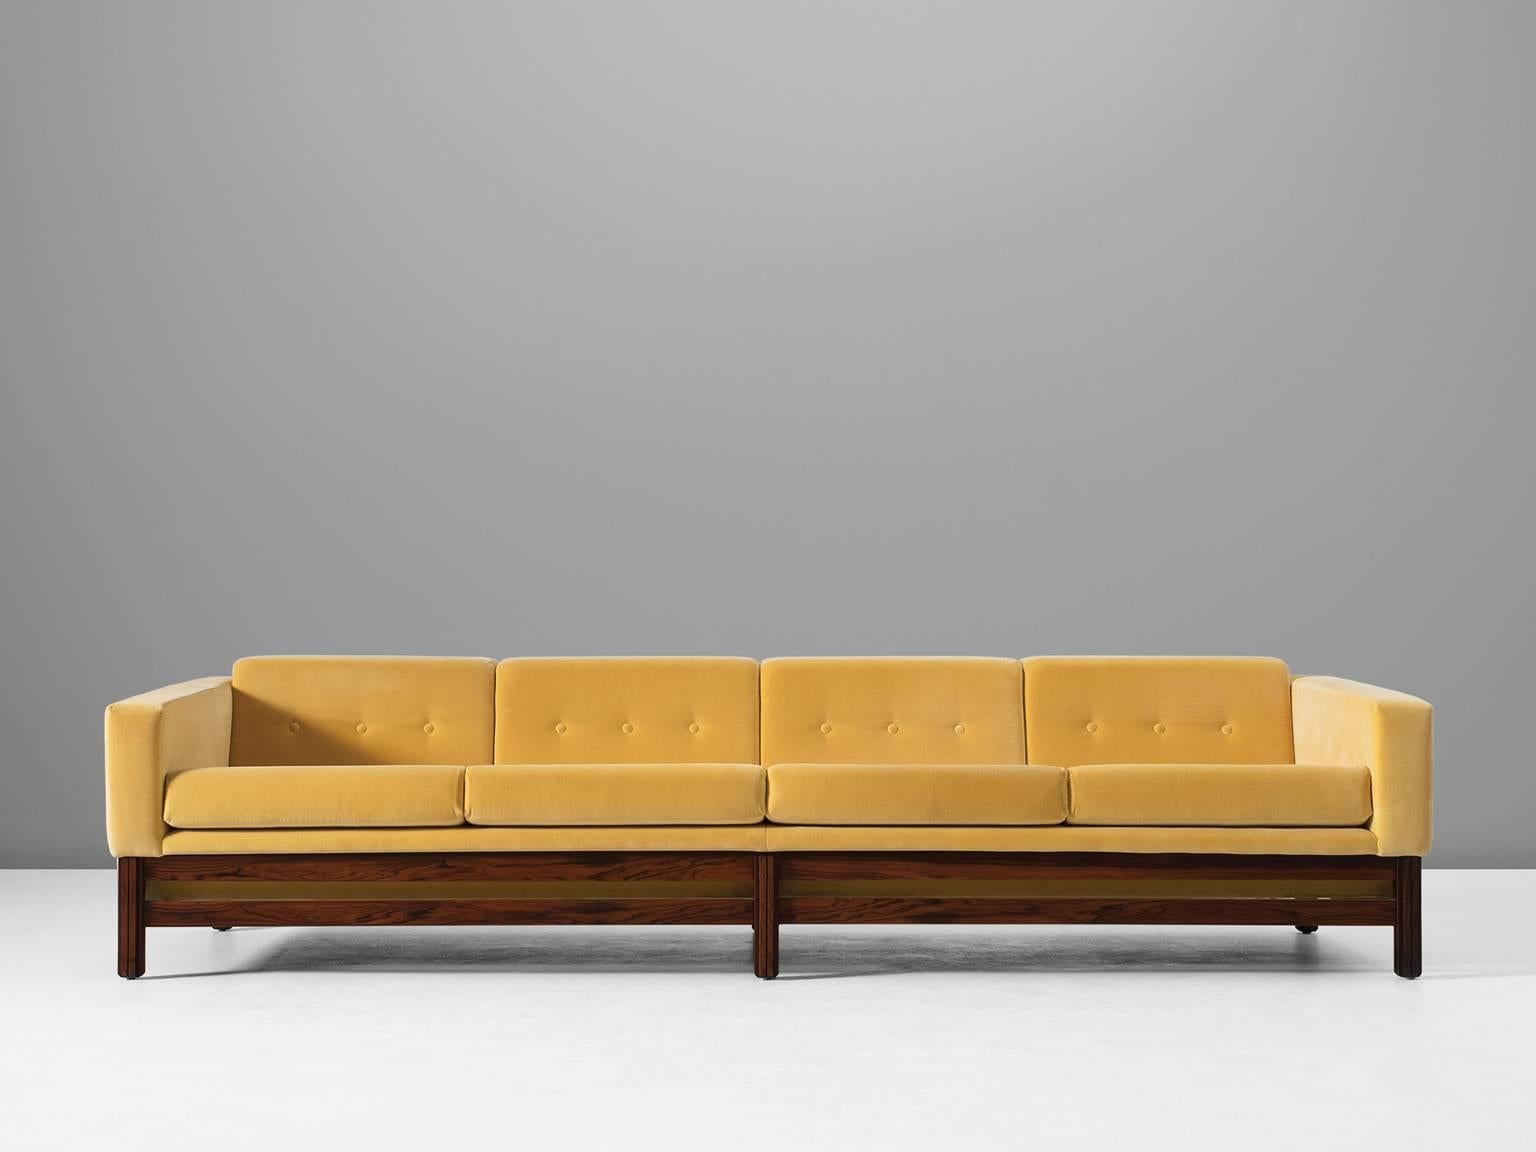 Sofa, in rosewood and fabric by Saporiti, Italy 1960s.

This sofa, equipped with a solid rosewood frame is reupholstered in high quality yellow velours like fabric. Done by our own team of specialists of the in-house atelier of Morentz. The sofa